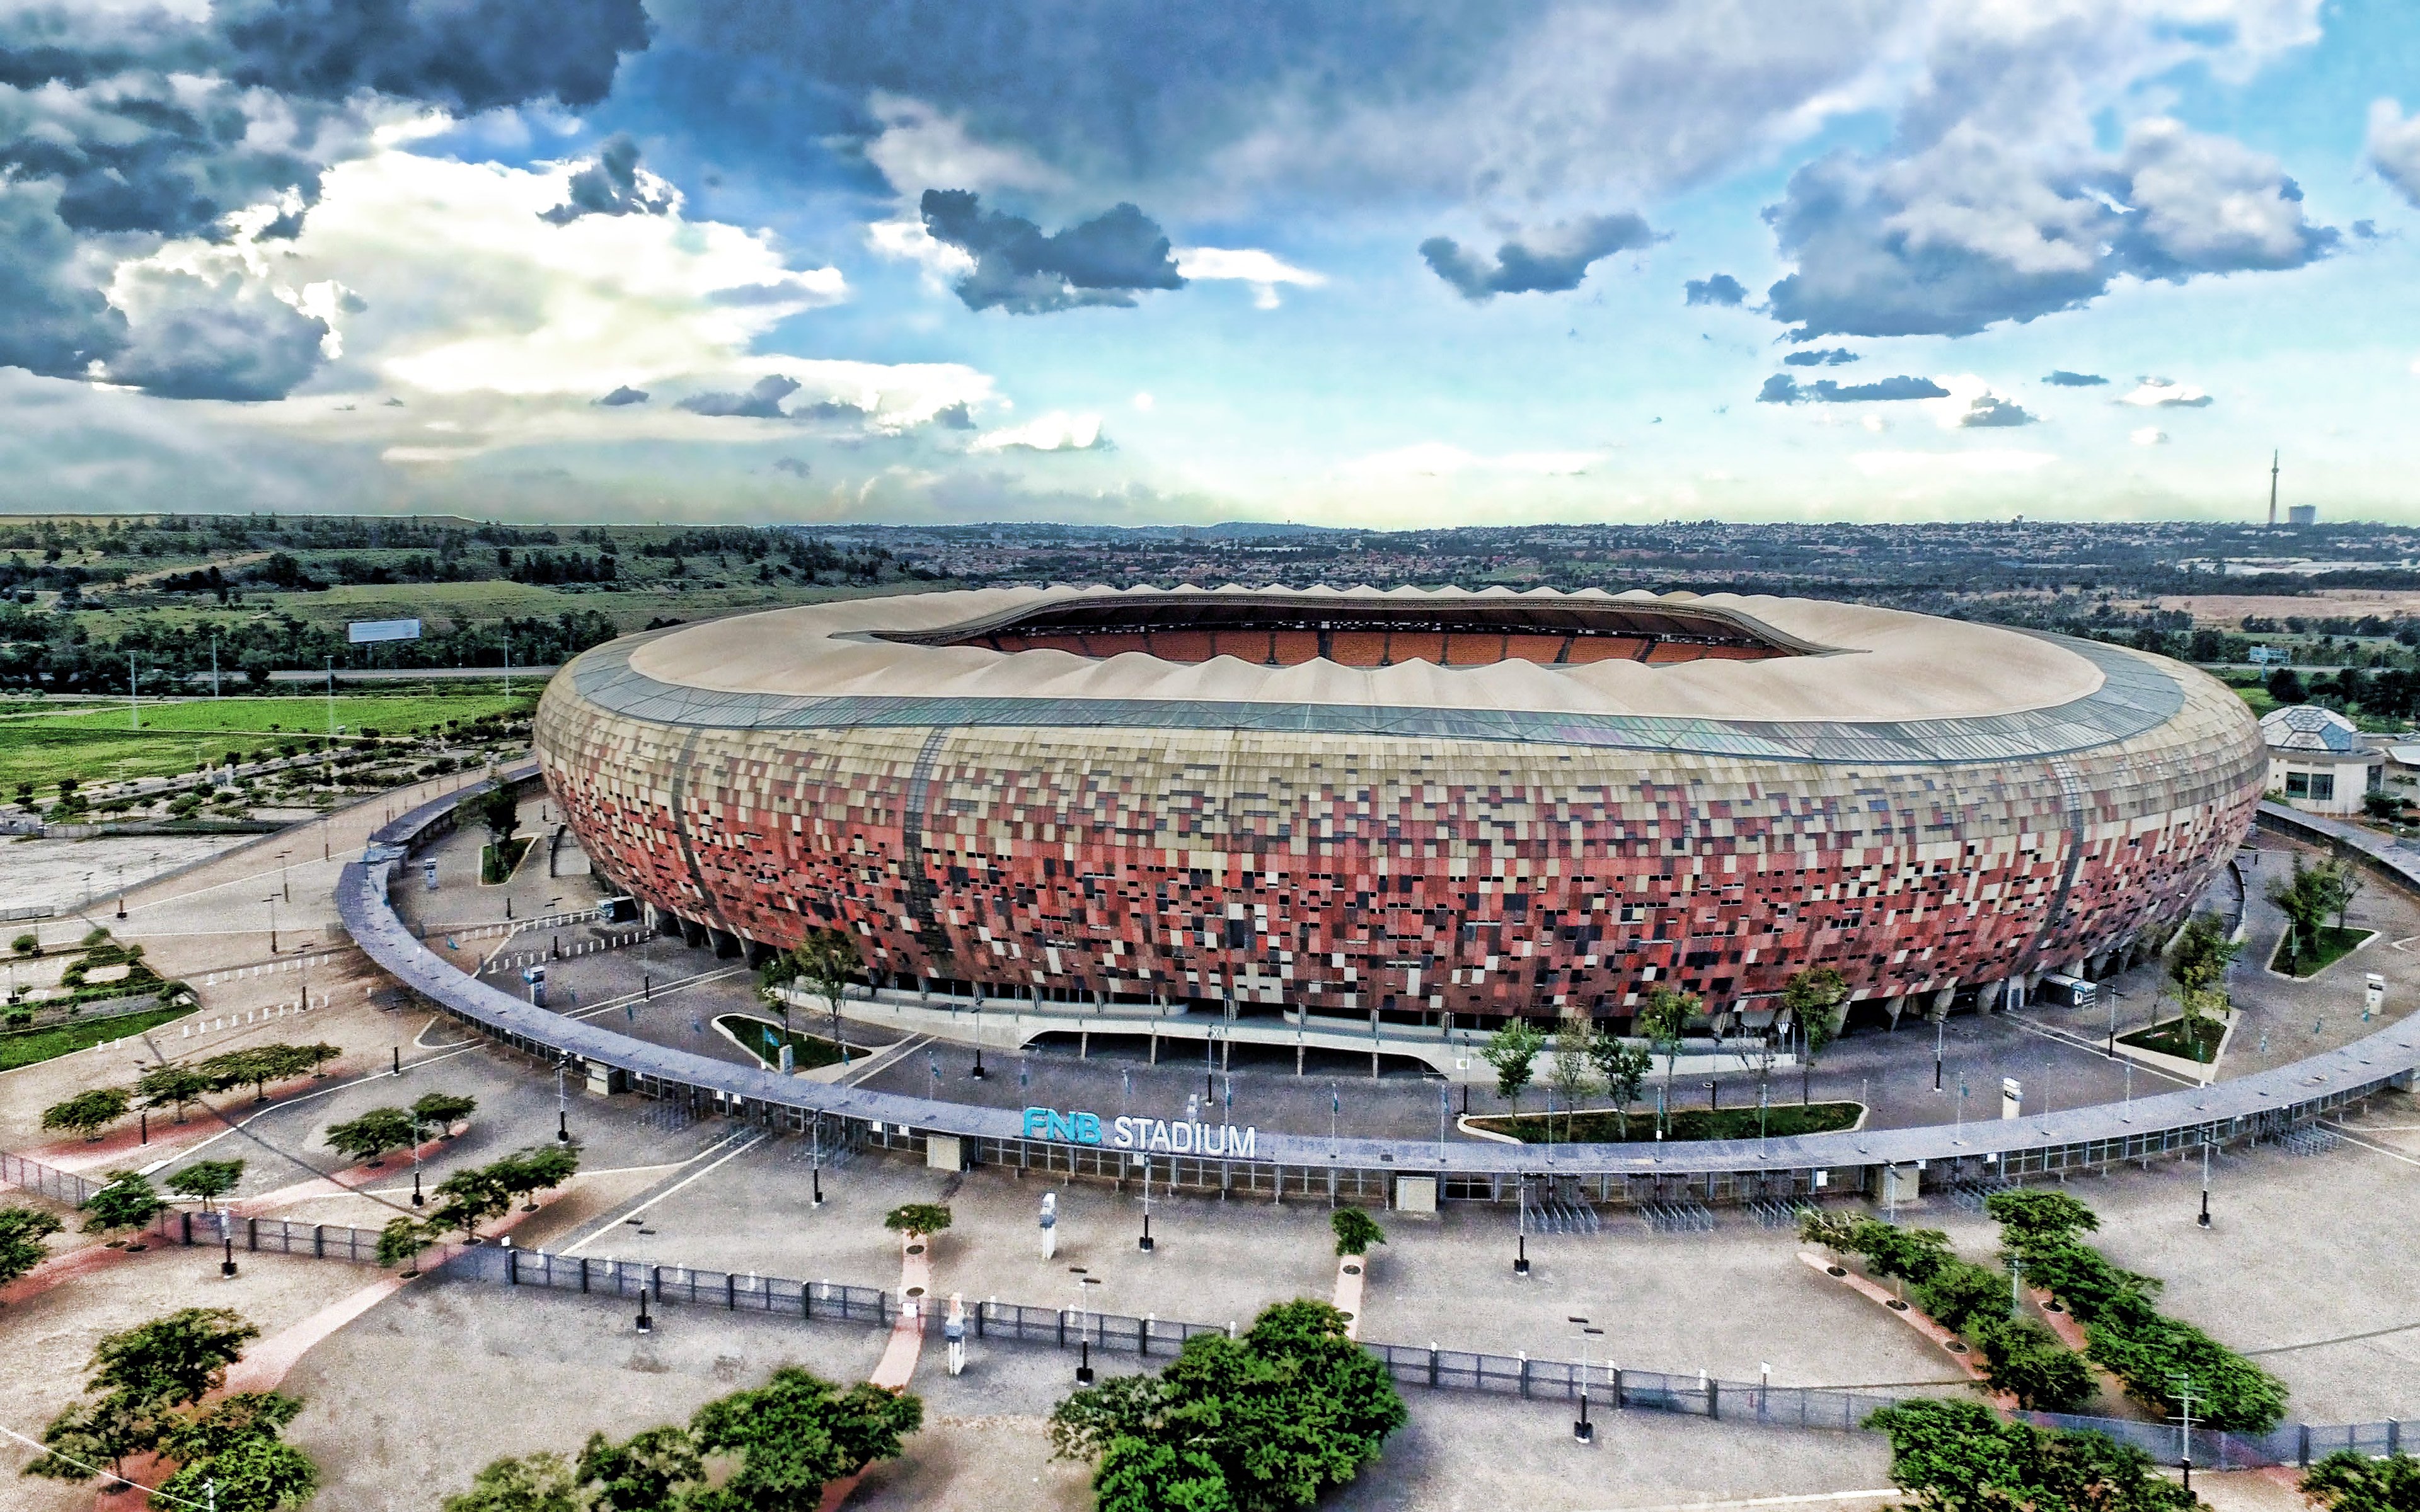 Download wallpaper 4k, FNB Stadium, aerial view, First National Bank Stadium, HDR, football stadium, Johannesburg, South Africa, South African stadiums for desktop with resolution 3840x2400. High Quality HD picture wallpaper